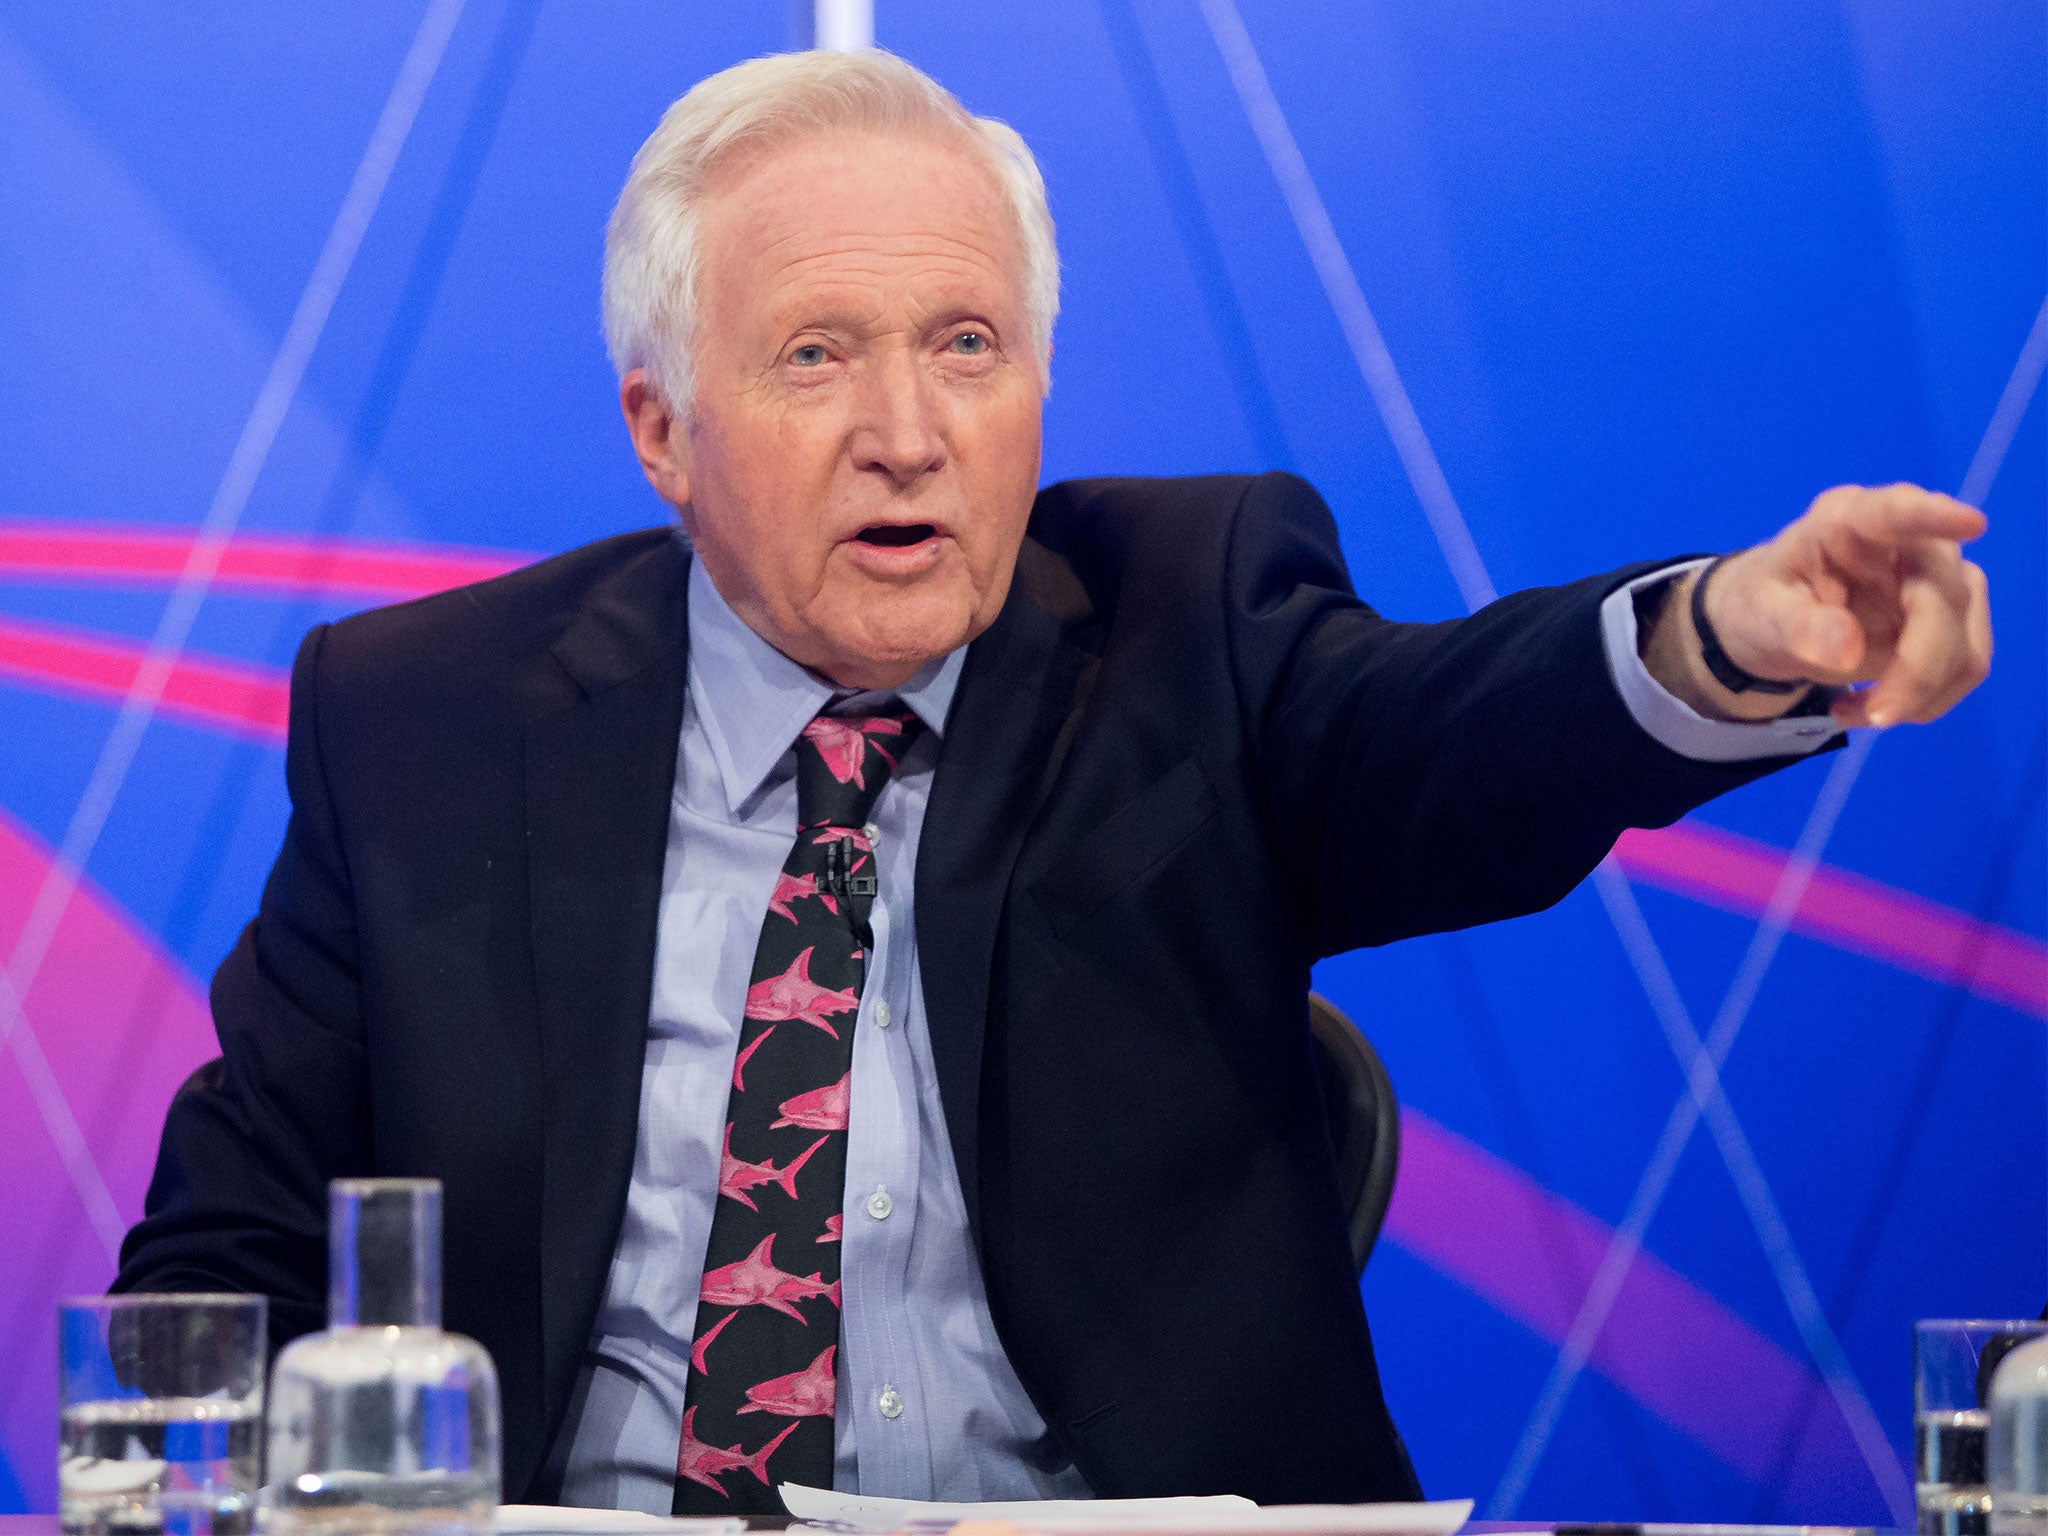 David Dimbleby has been a regular face on British television screens since the 1960s